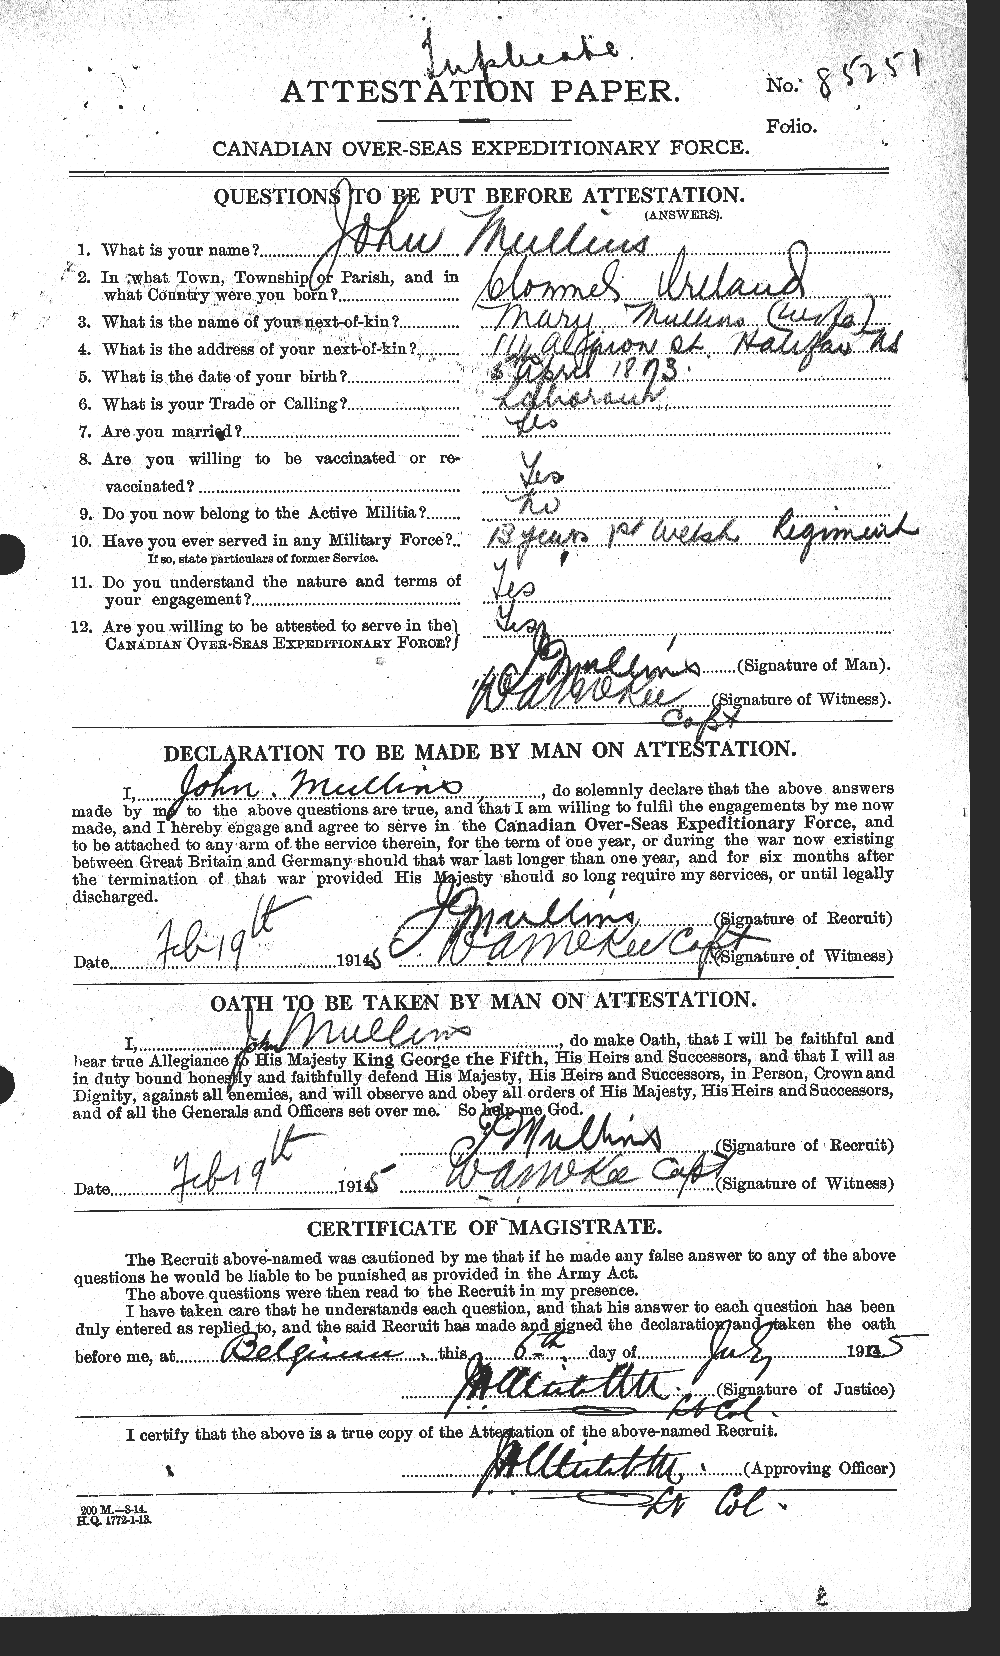 Personnel Records of the First World War - CEF 513501a